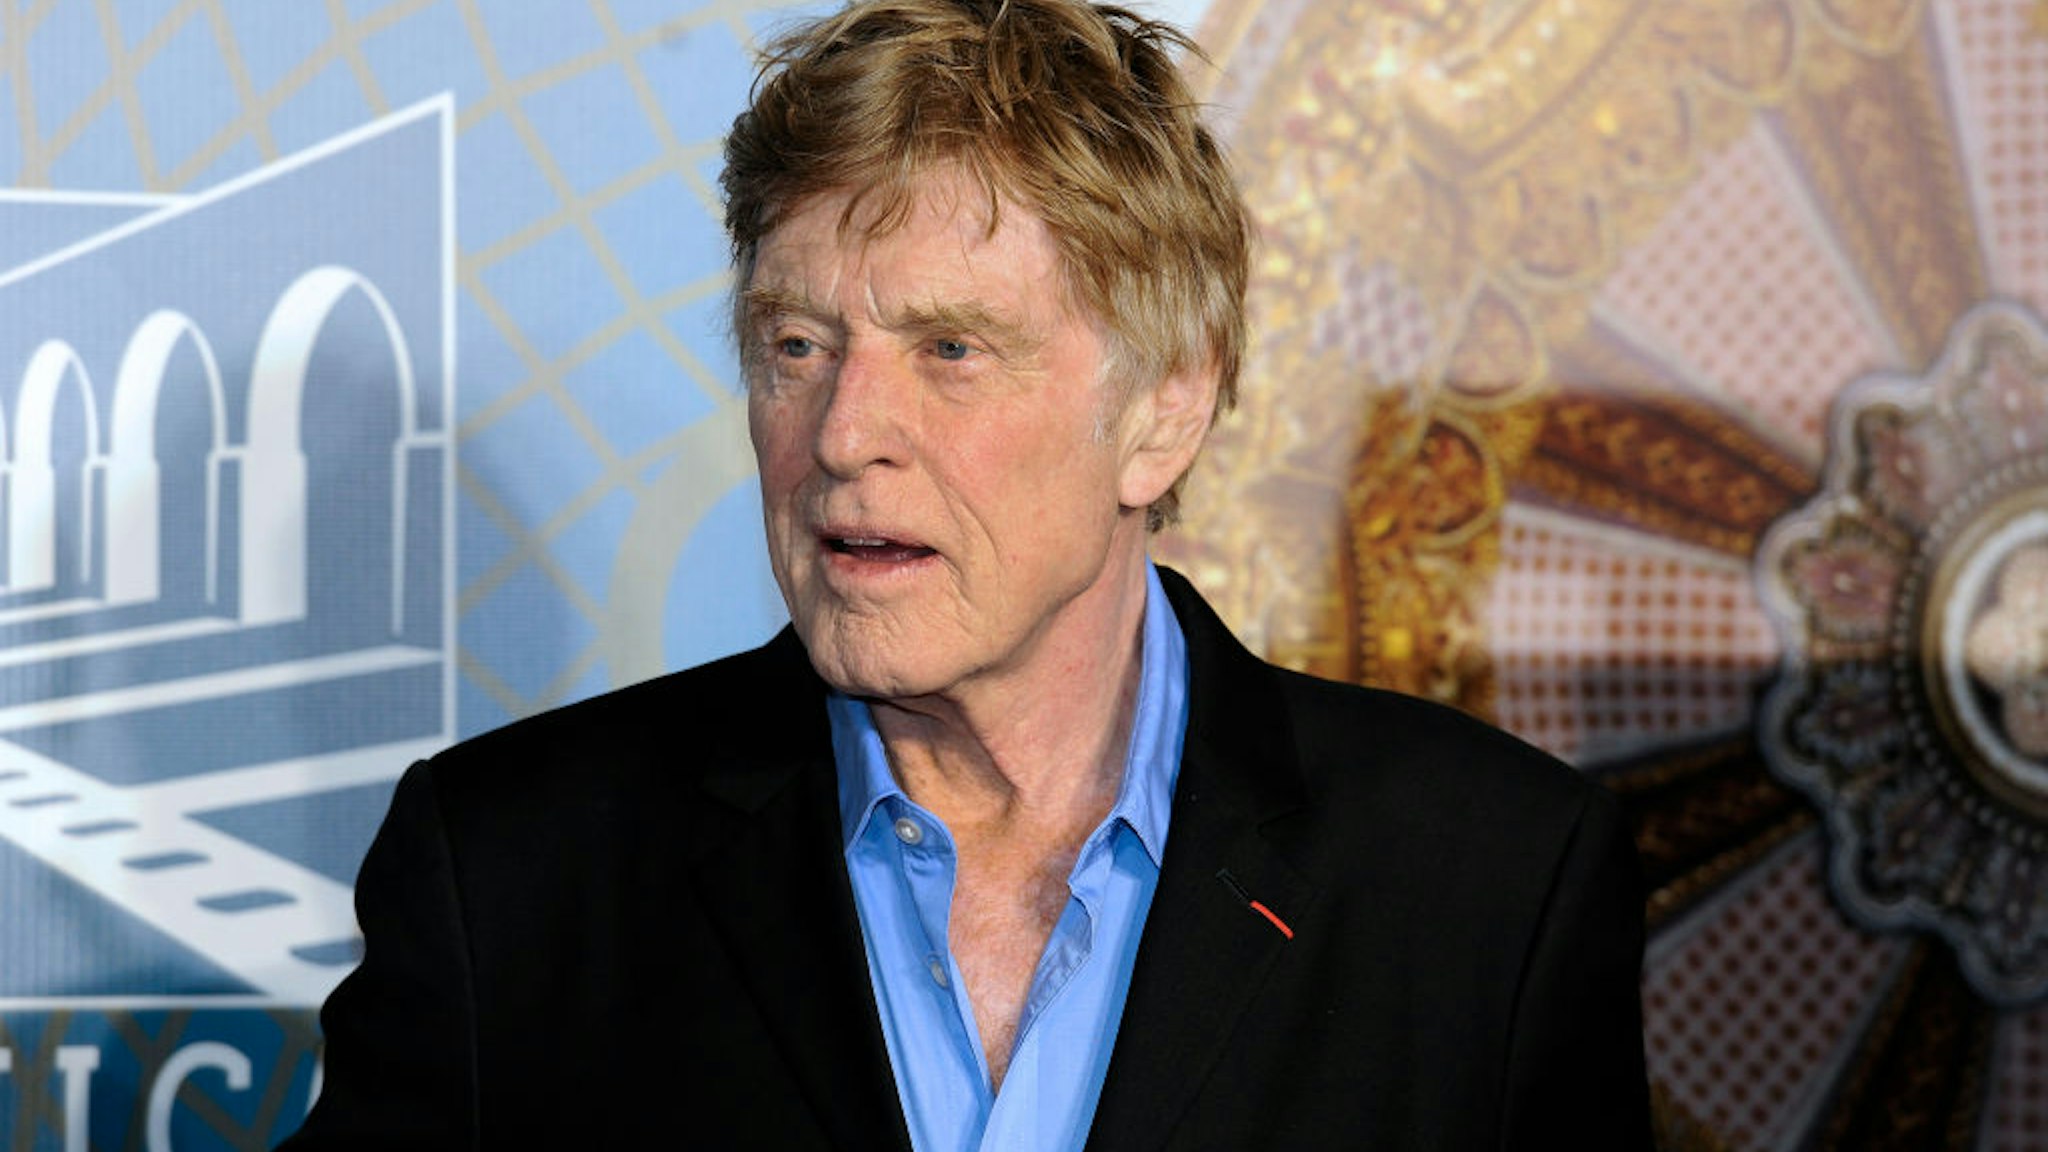 Robert Redford attends the presentation of the plaque of past edition winners during the 2019 Morelia International Film Festival on October 22, 2019 in Morelia, Mexico.